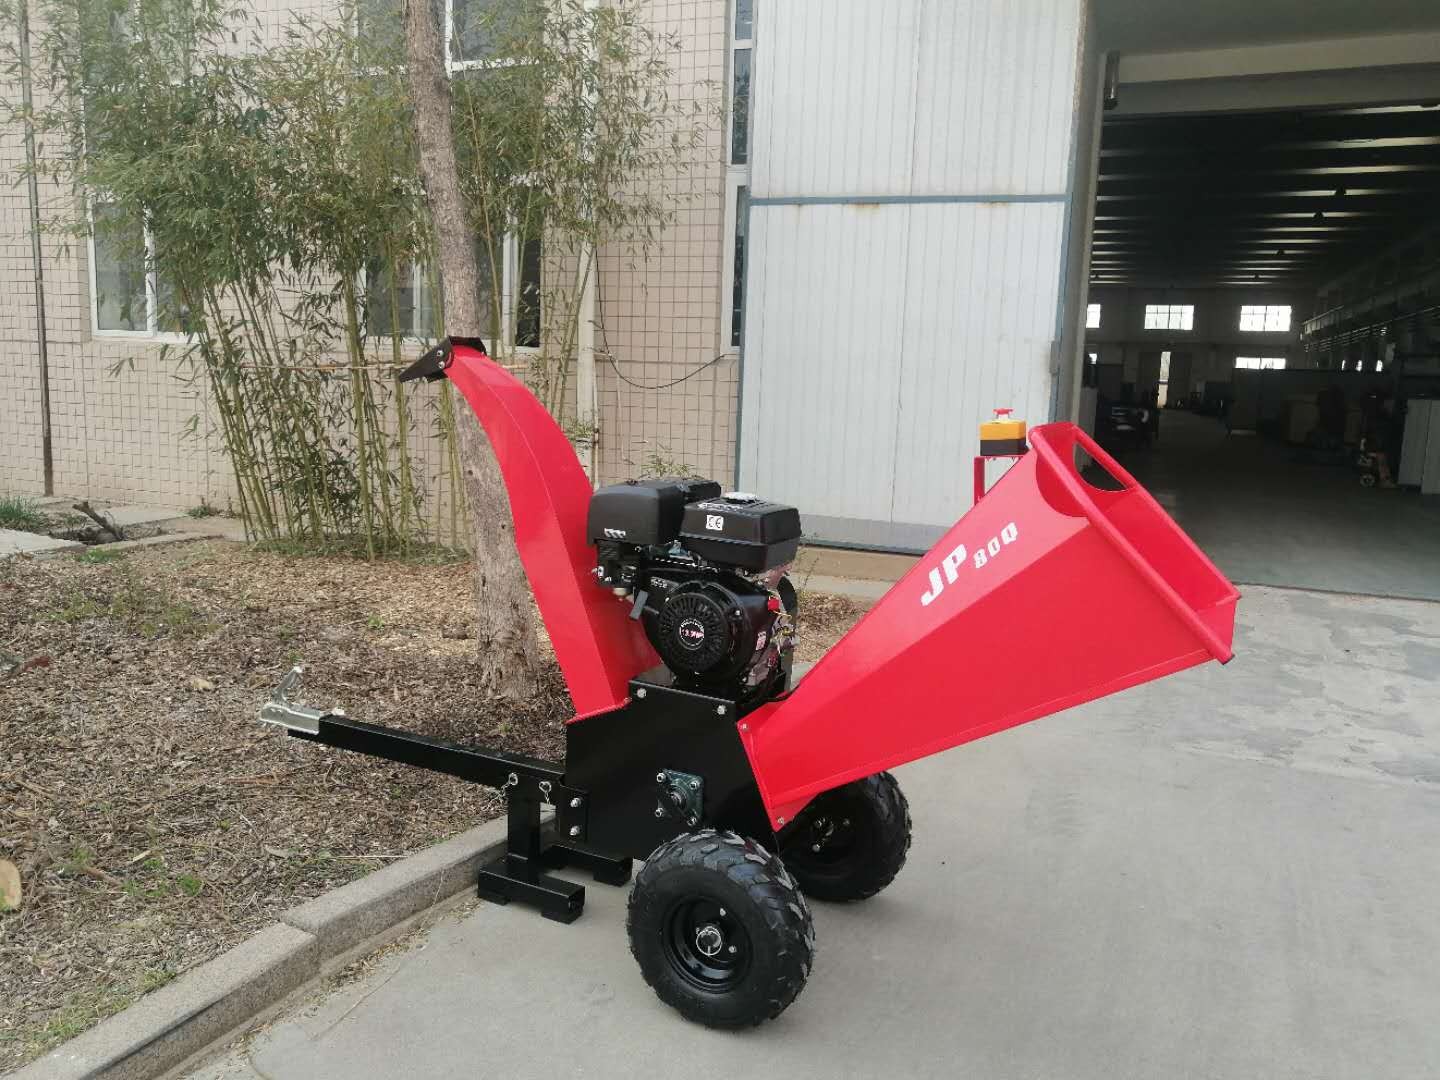 13hp ATV wood chipper with gasoline engine